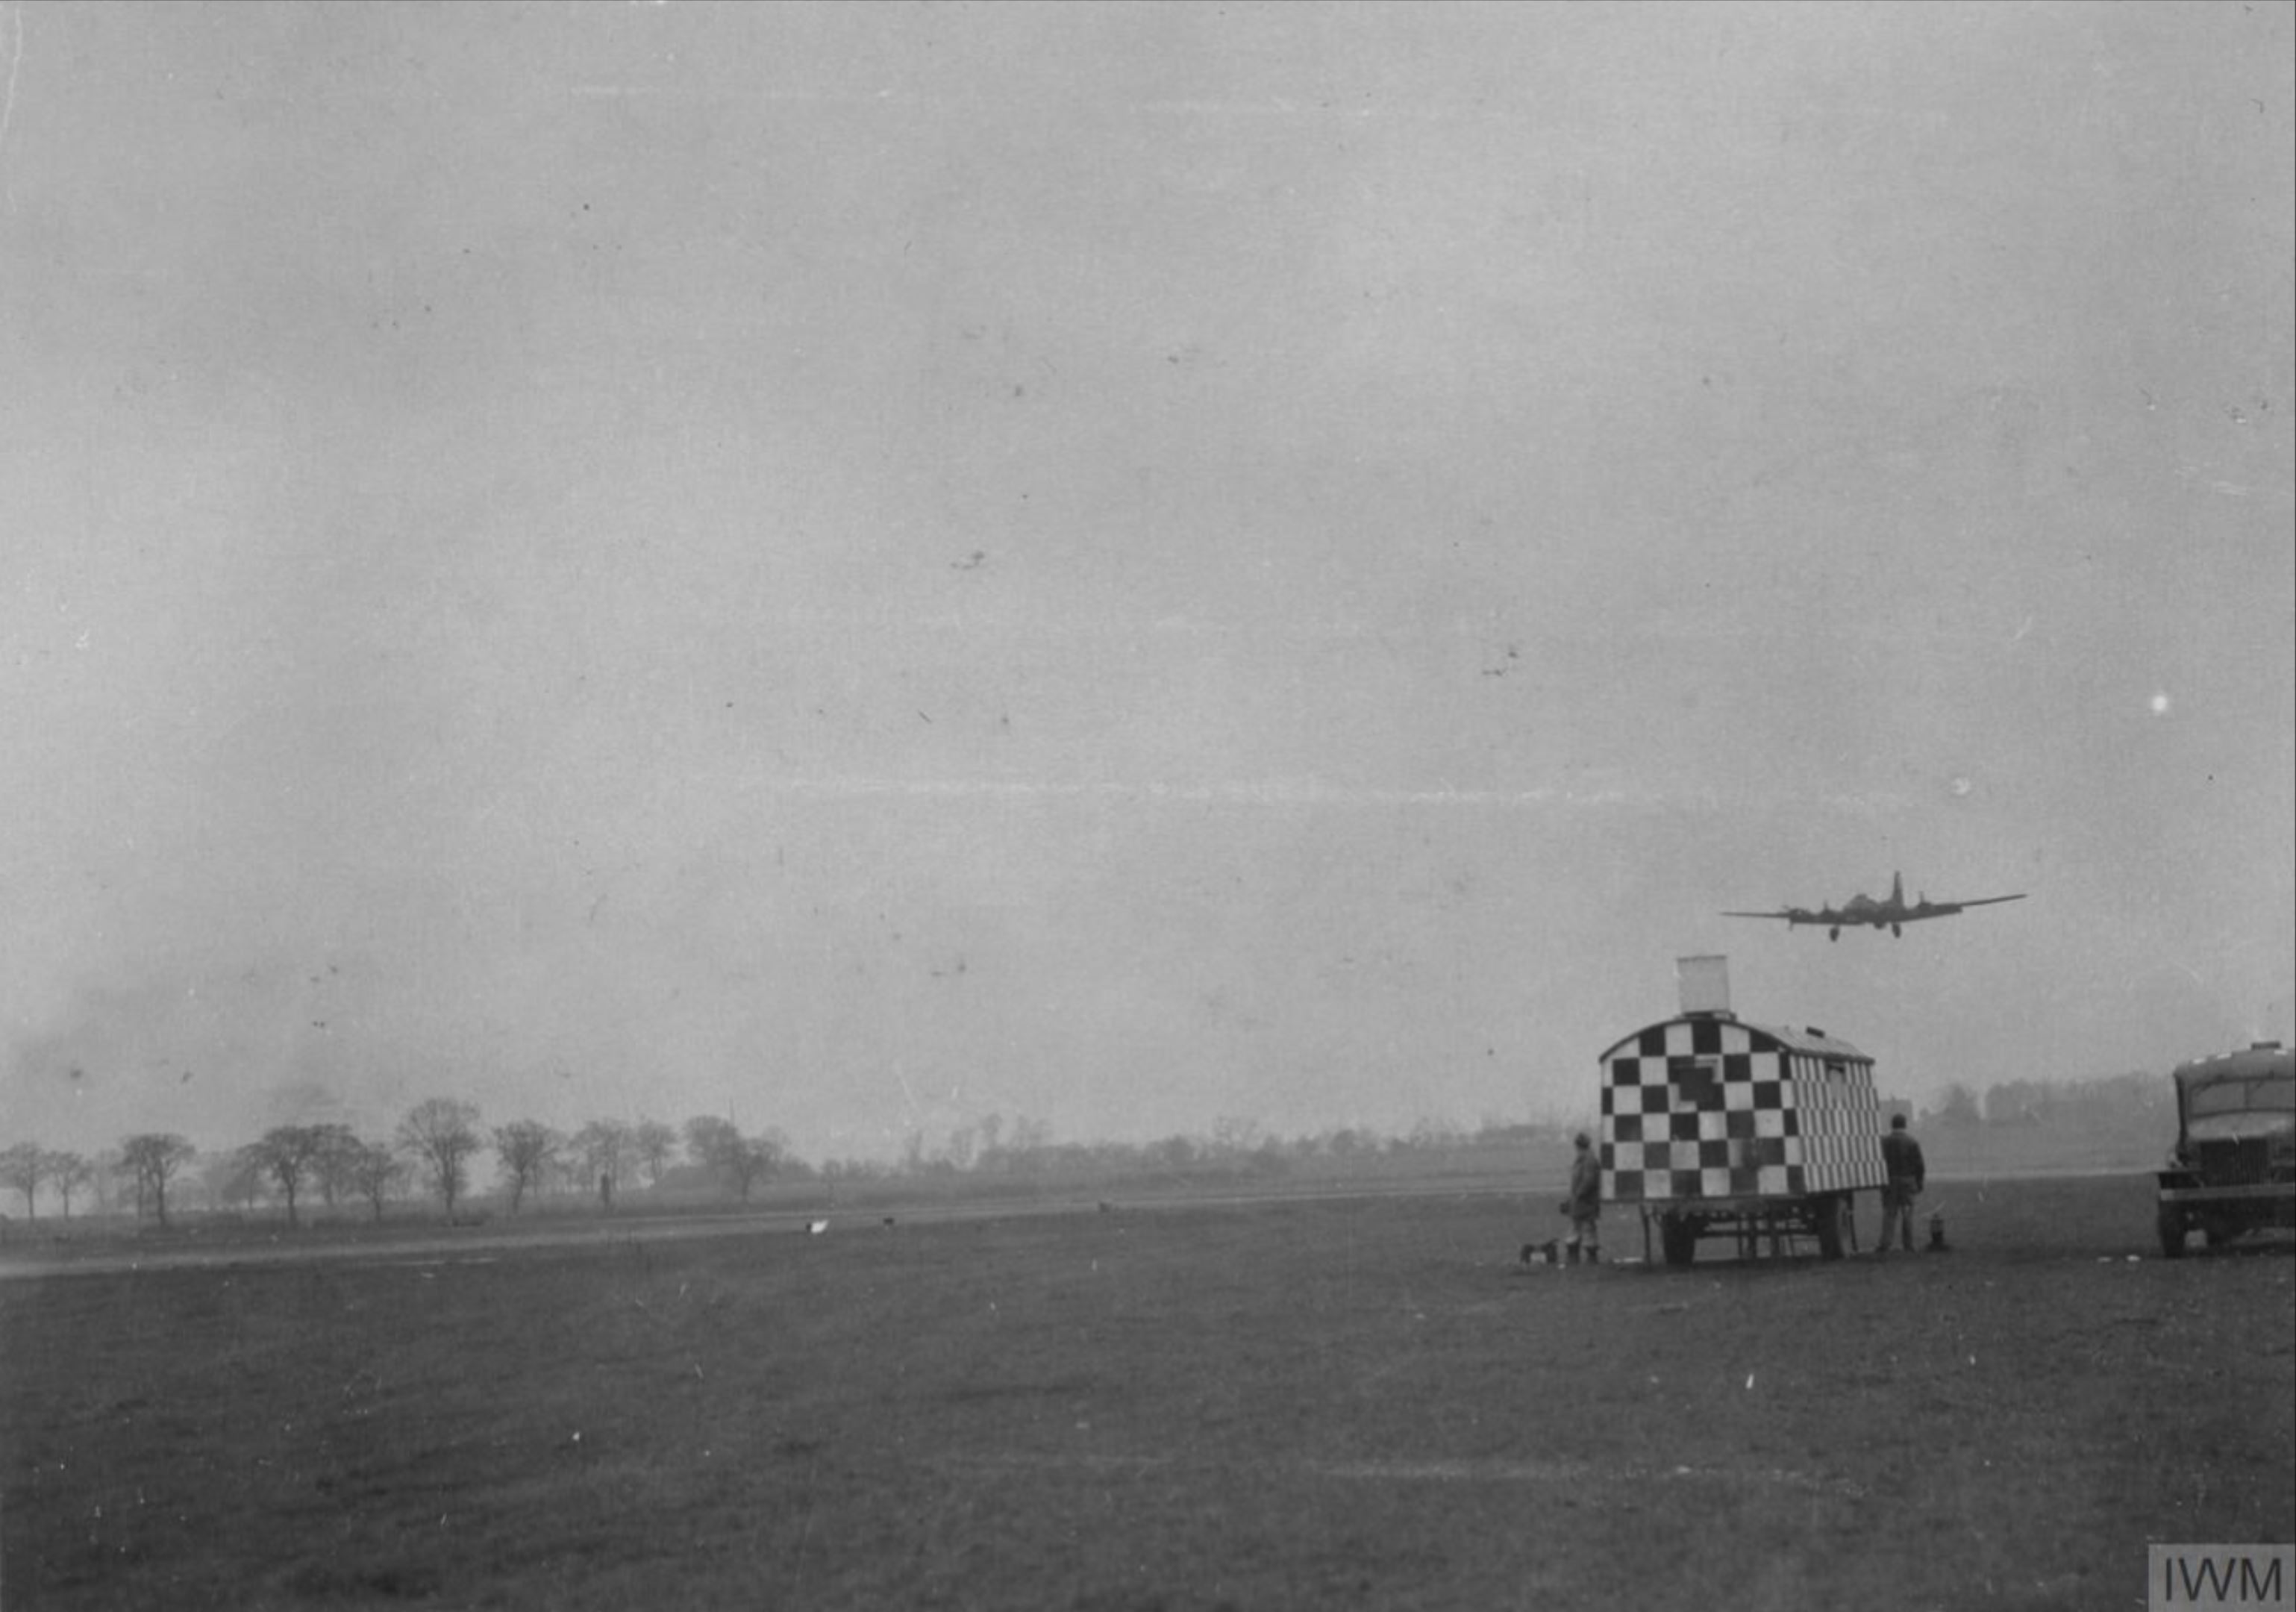 Boeing B 17F Fortress 8AF 94BG lands in low visibility at Rougham guided by flares and the mobile tower 13 Dec 1943 FRE3822